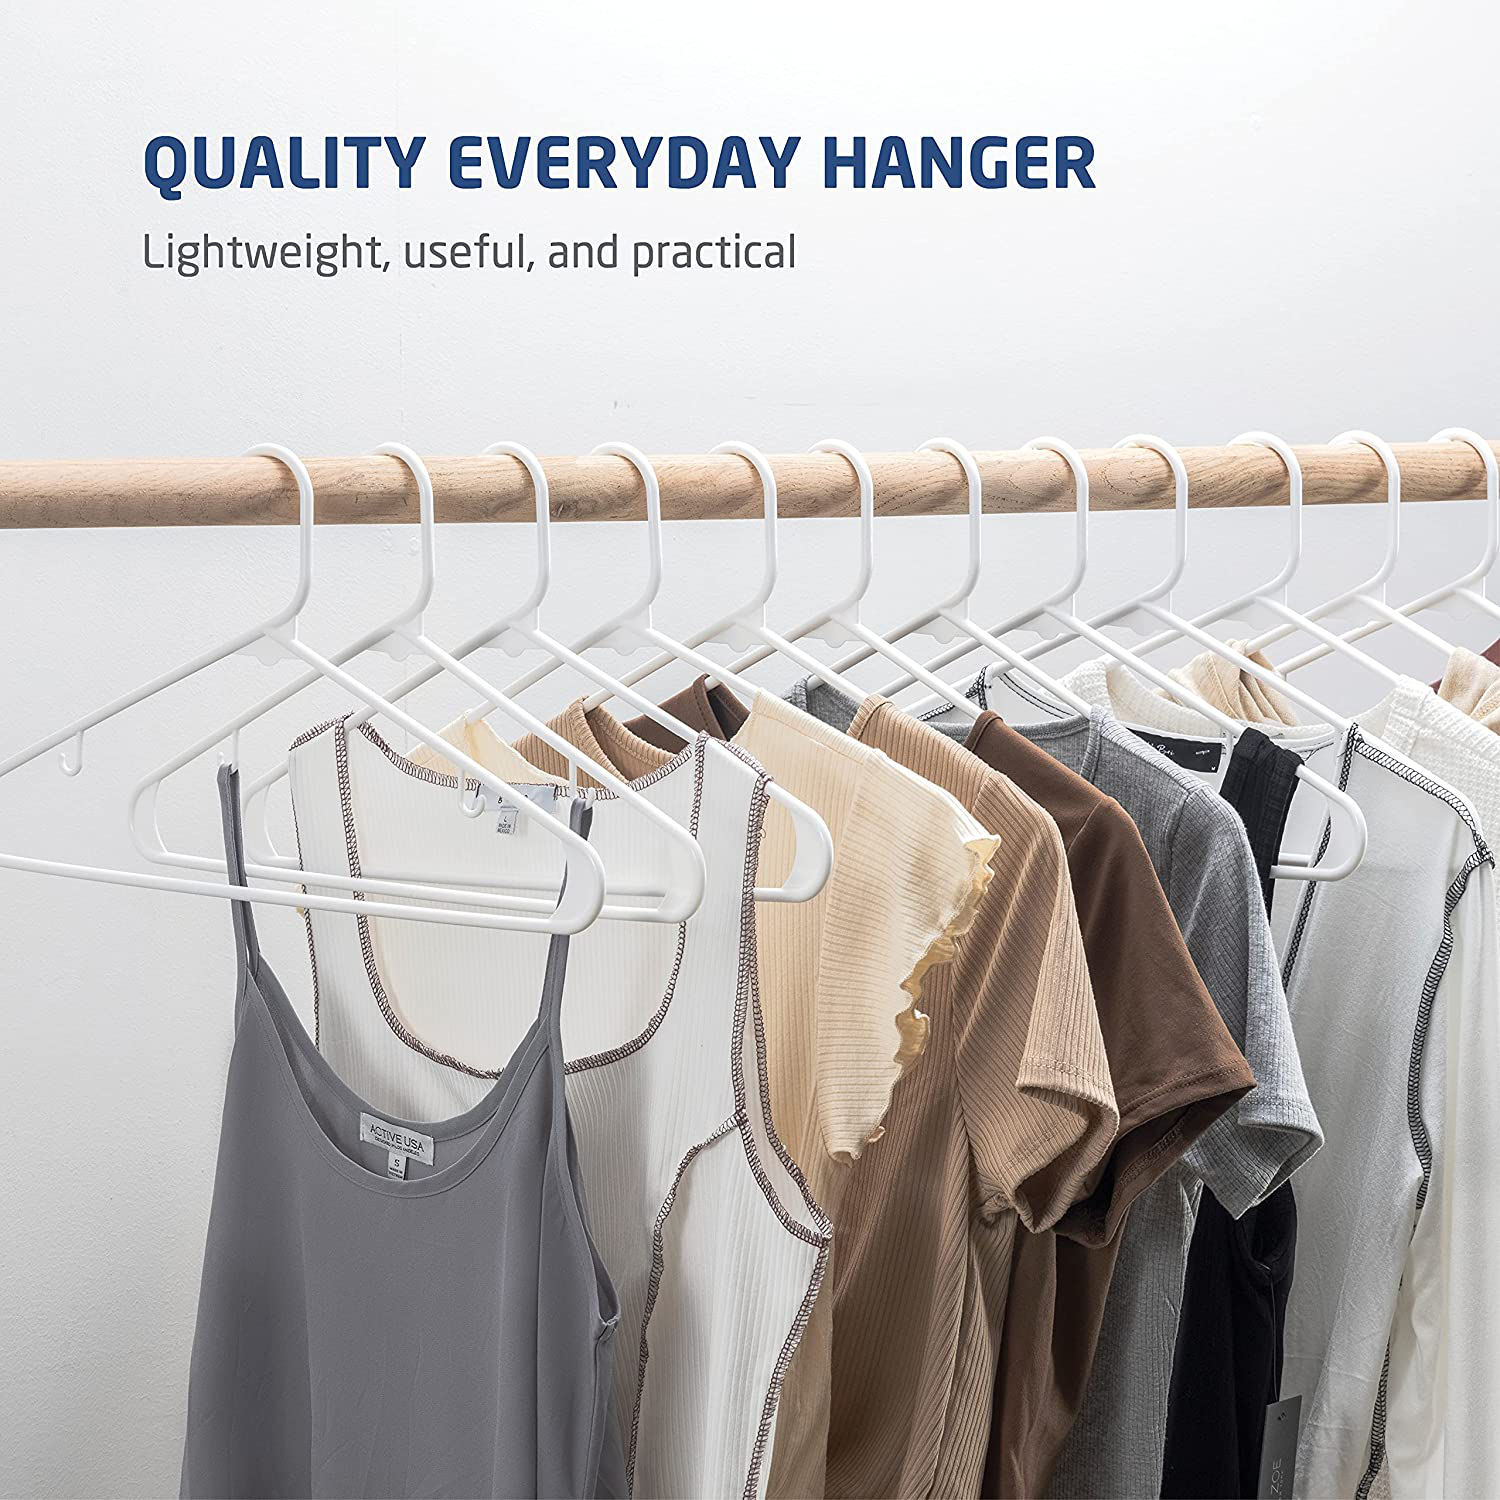 Black Standard Plastic Hangers (50 Pack) Durable Tubular Shirt Hanger Ideal for Laundry & Everyday Use, Slim & Space Saving, Heavy Duty Clothes Hanger for Coats, Pants, Dress, Etc. Hangs up to 5.5 lbs